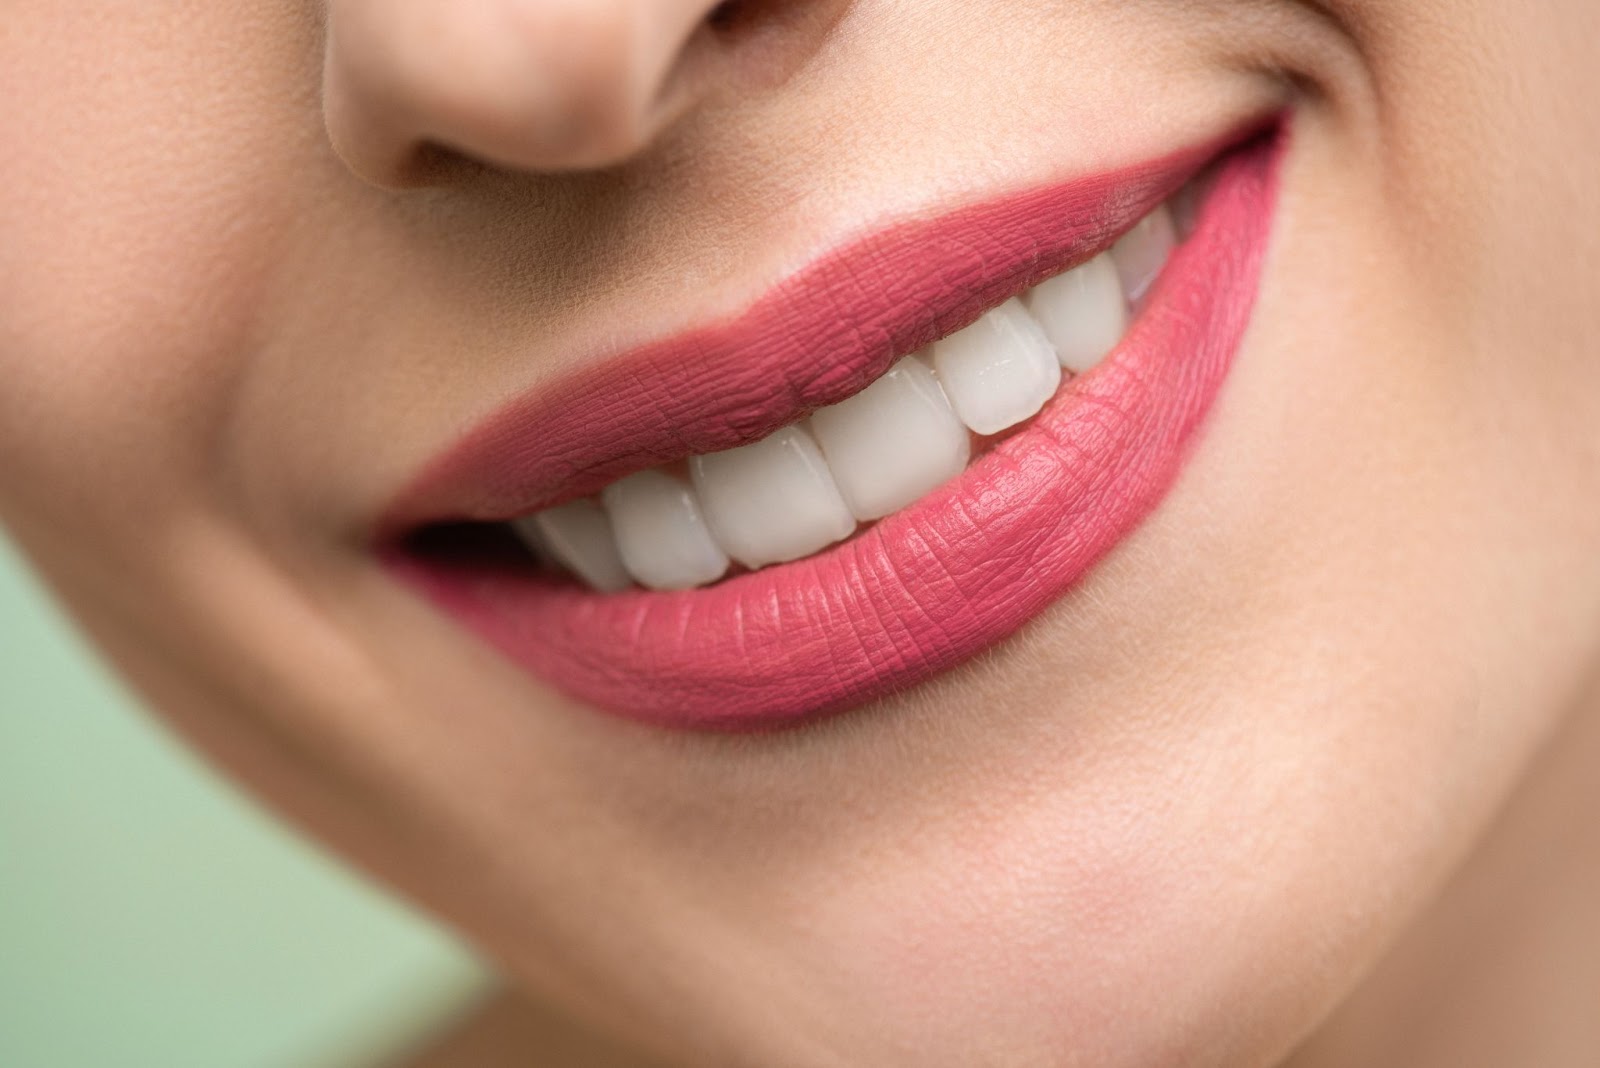 Are White Strips Bad For Your Teeth? Everything You Need to Know